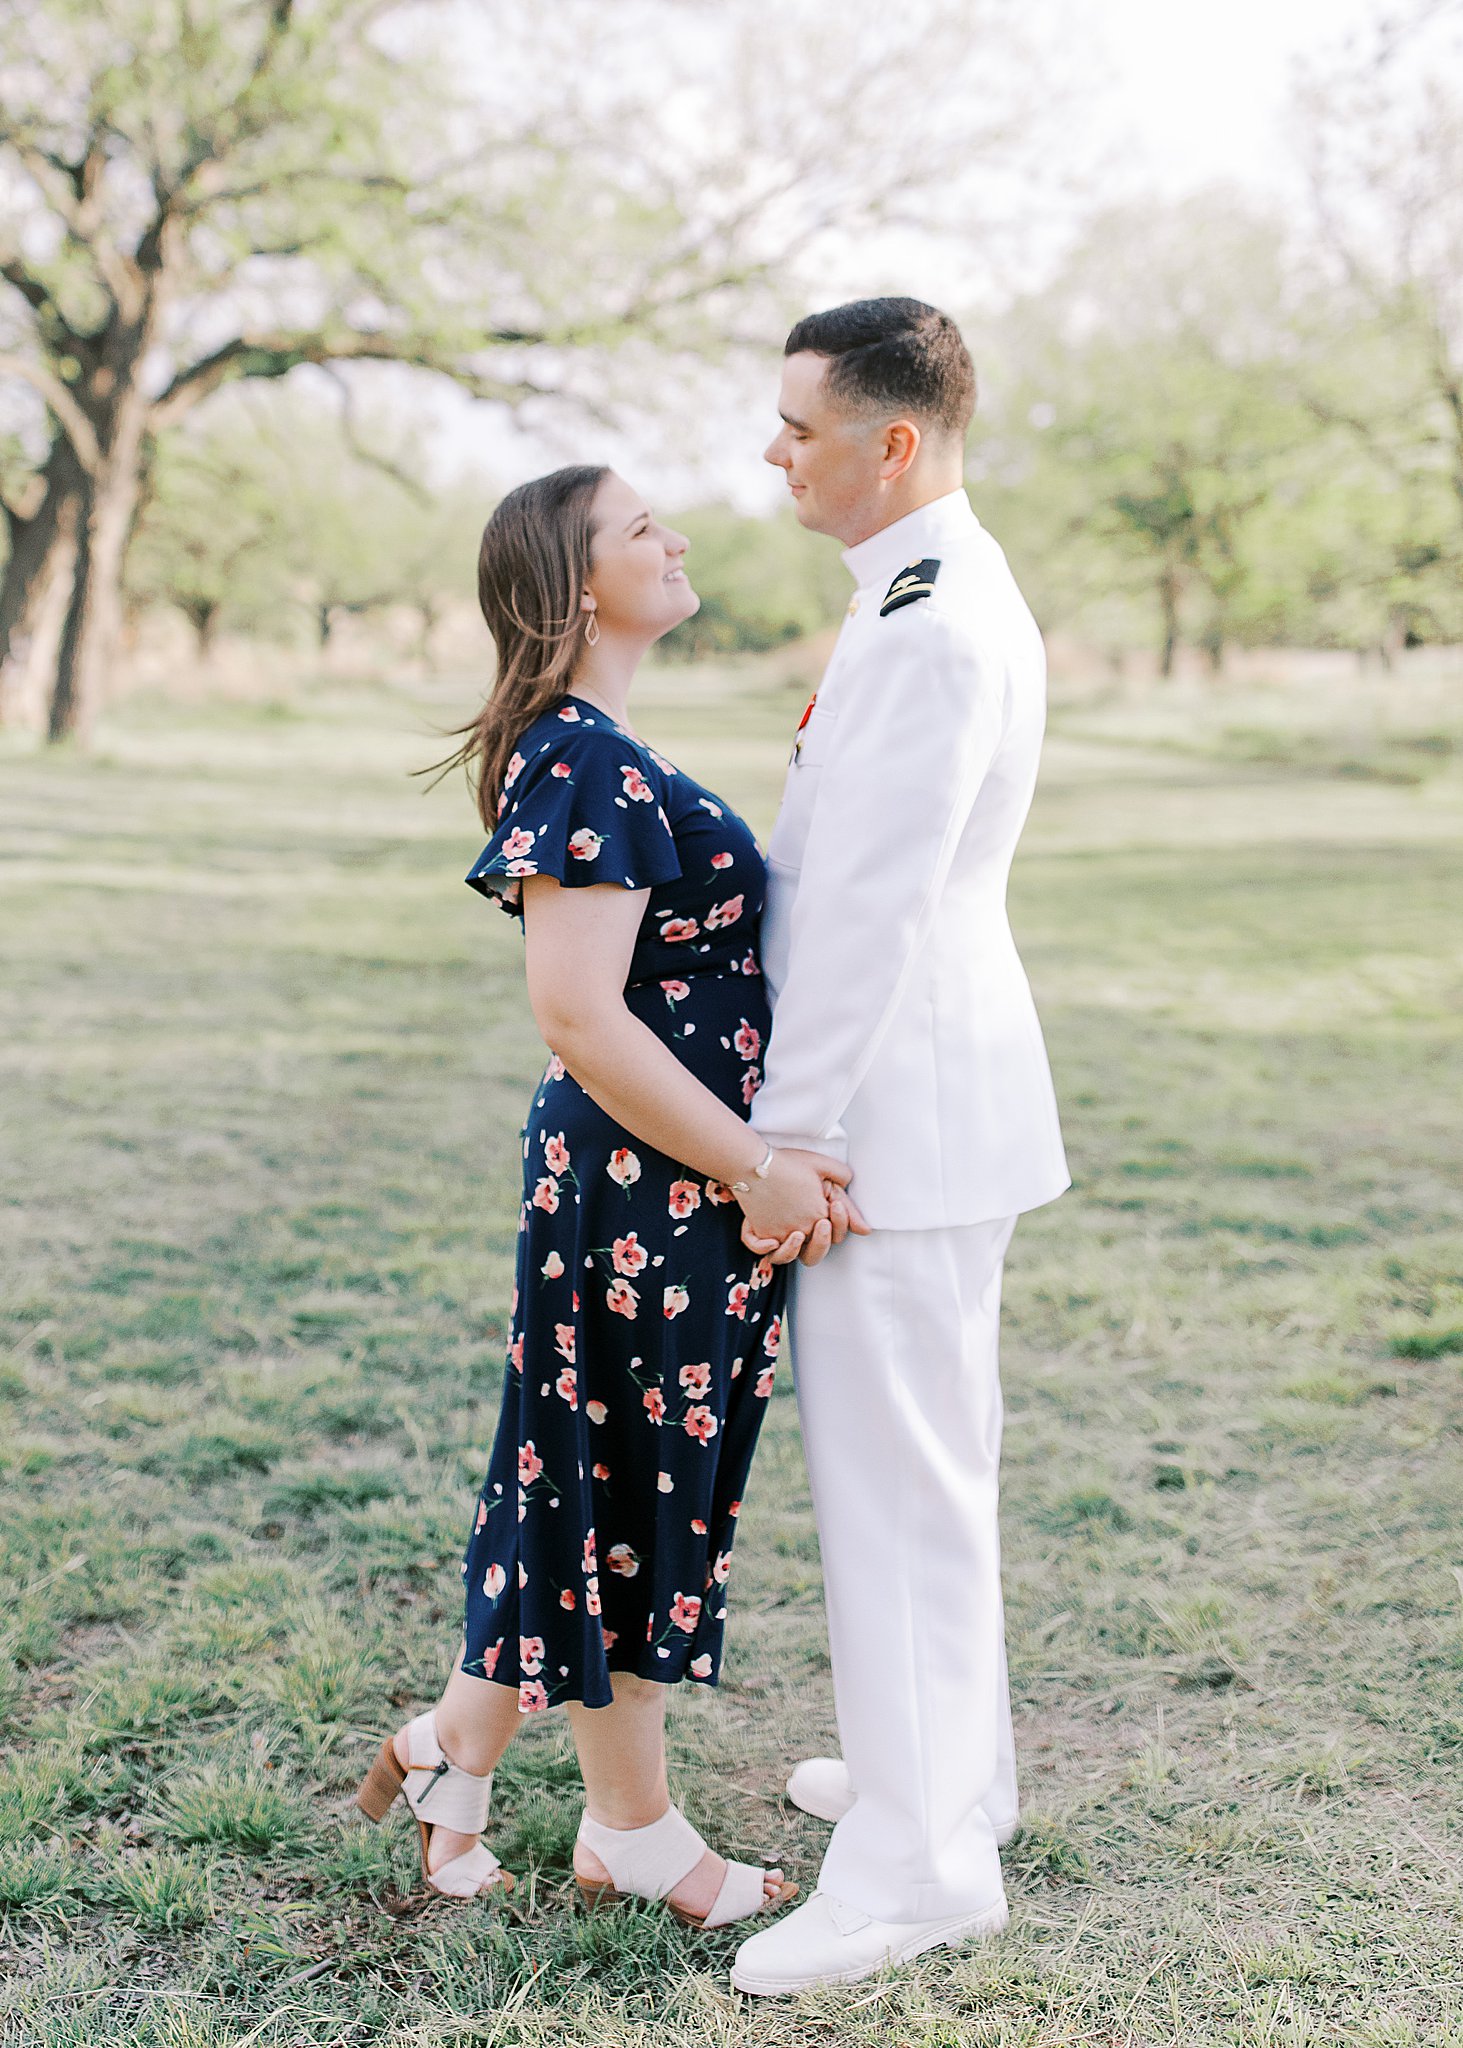 Navy Pilot in Dress Whites for Engagement Session, Anna Kay Photography, San Antonio Photographer